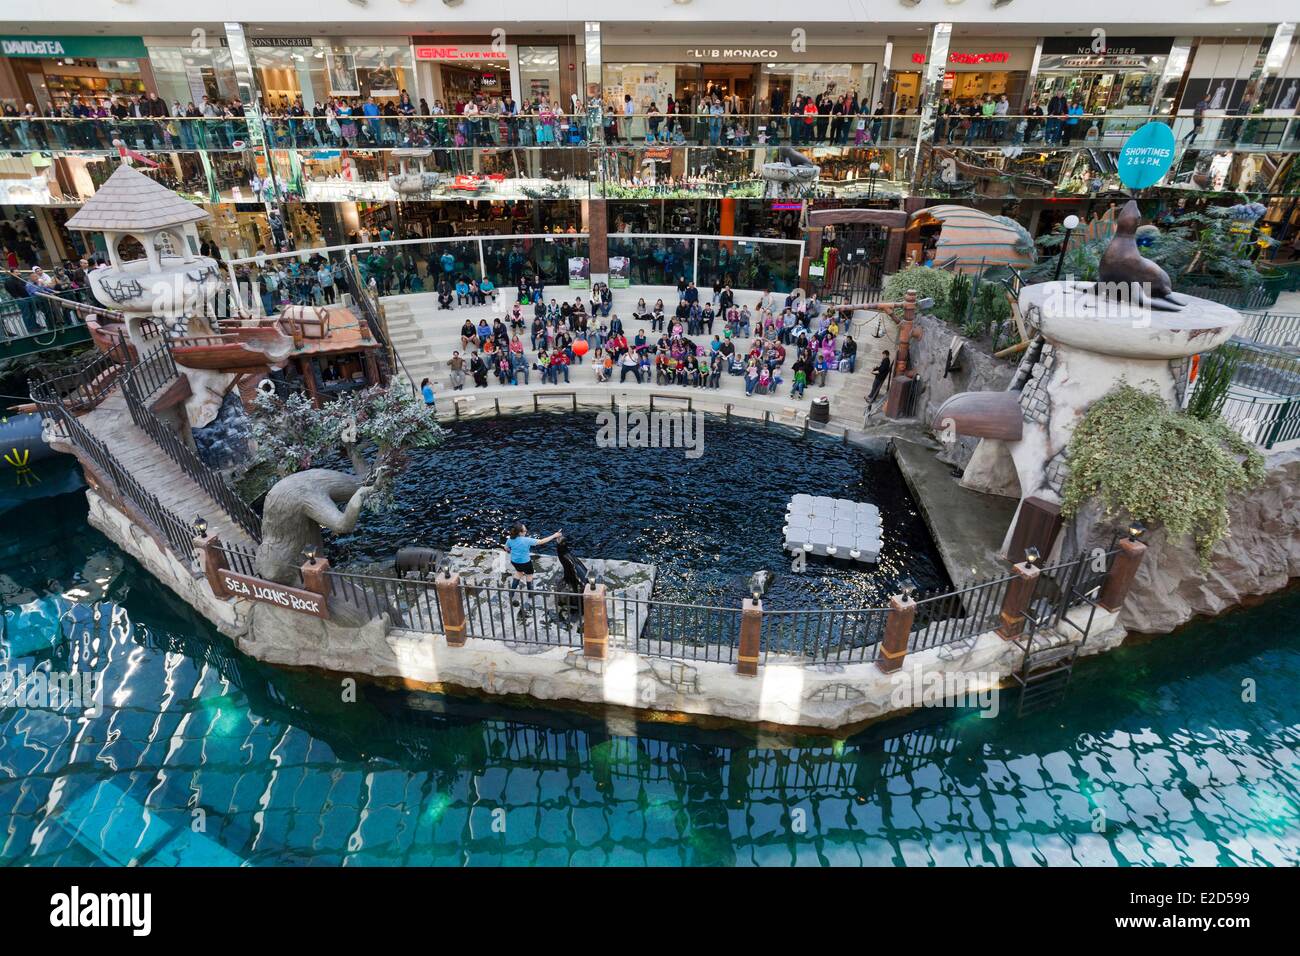 West Edmonton Mall In Canada Stock Photo, Picture and Royalty Free Image.  Image 117387728.